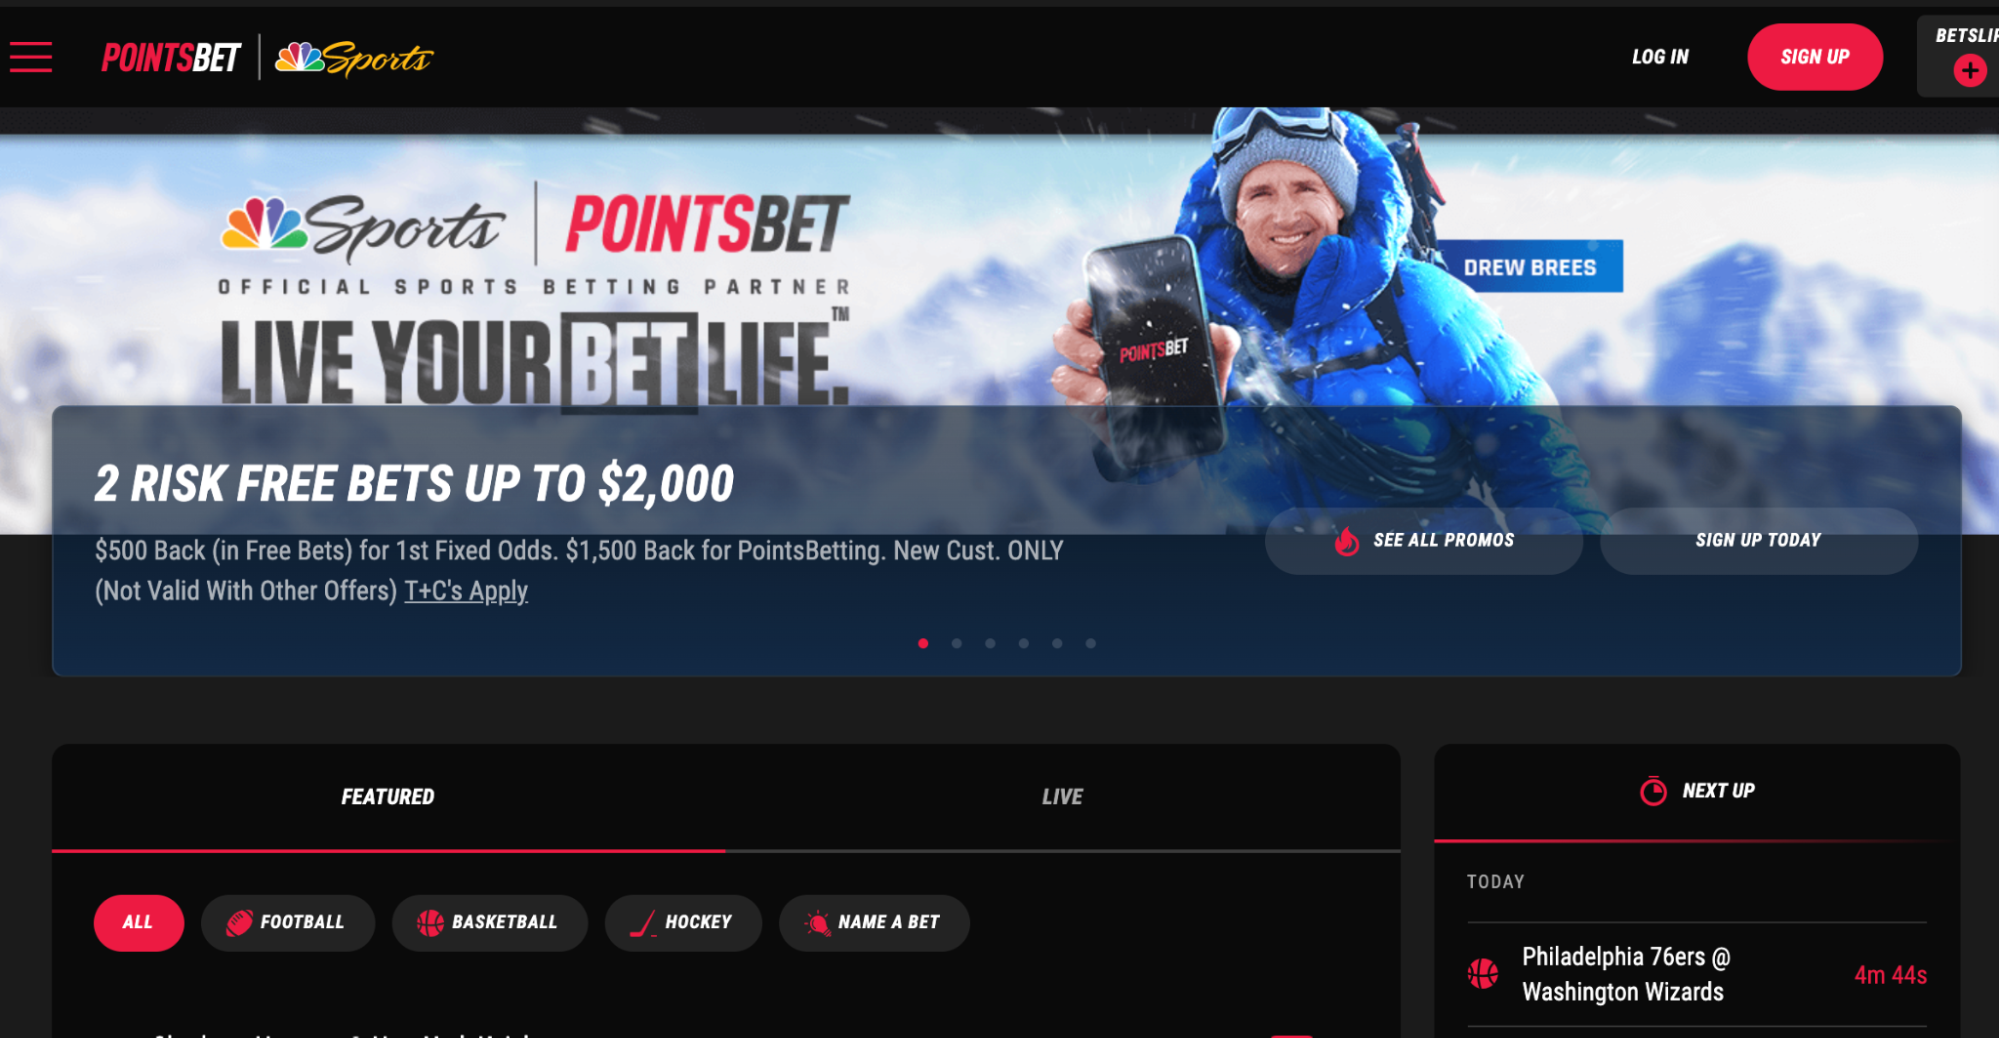 PointsBet main page